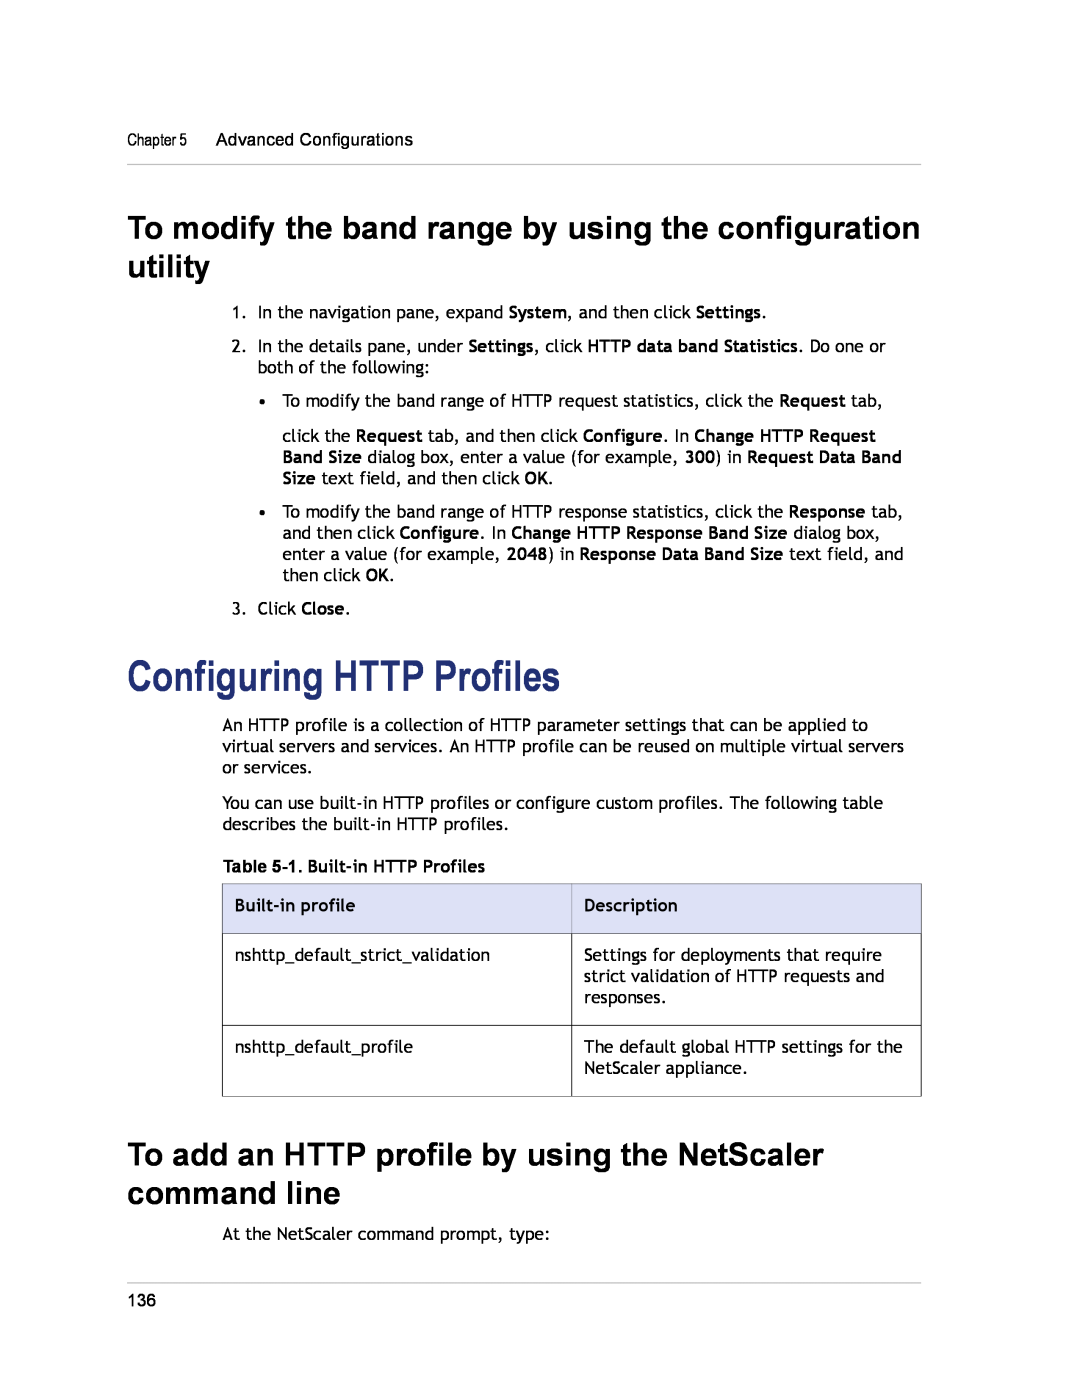 Citrix Systems CITRIX NETSCALER 9.3 Configuring HTTP Profiles, To modify the band range by using the configuration utility 